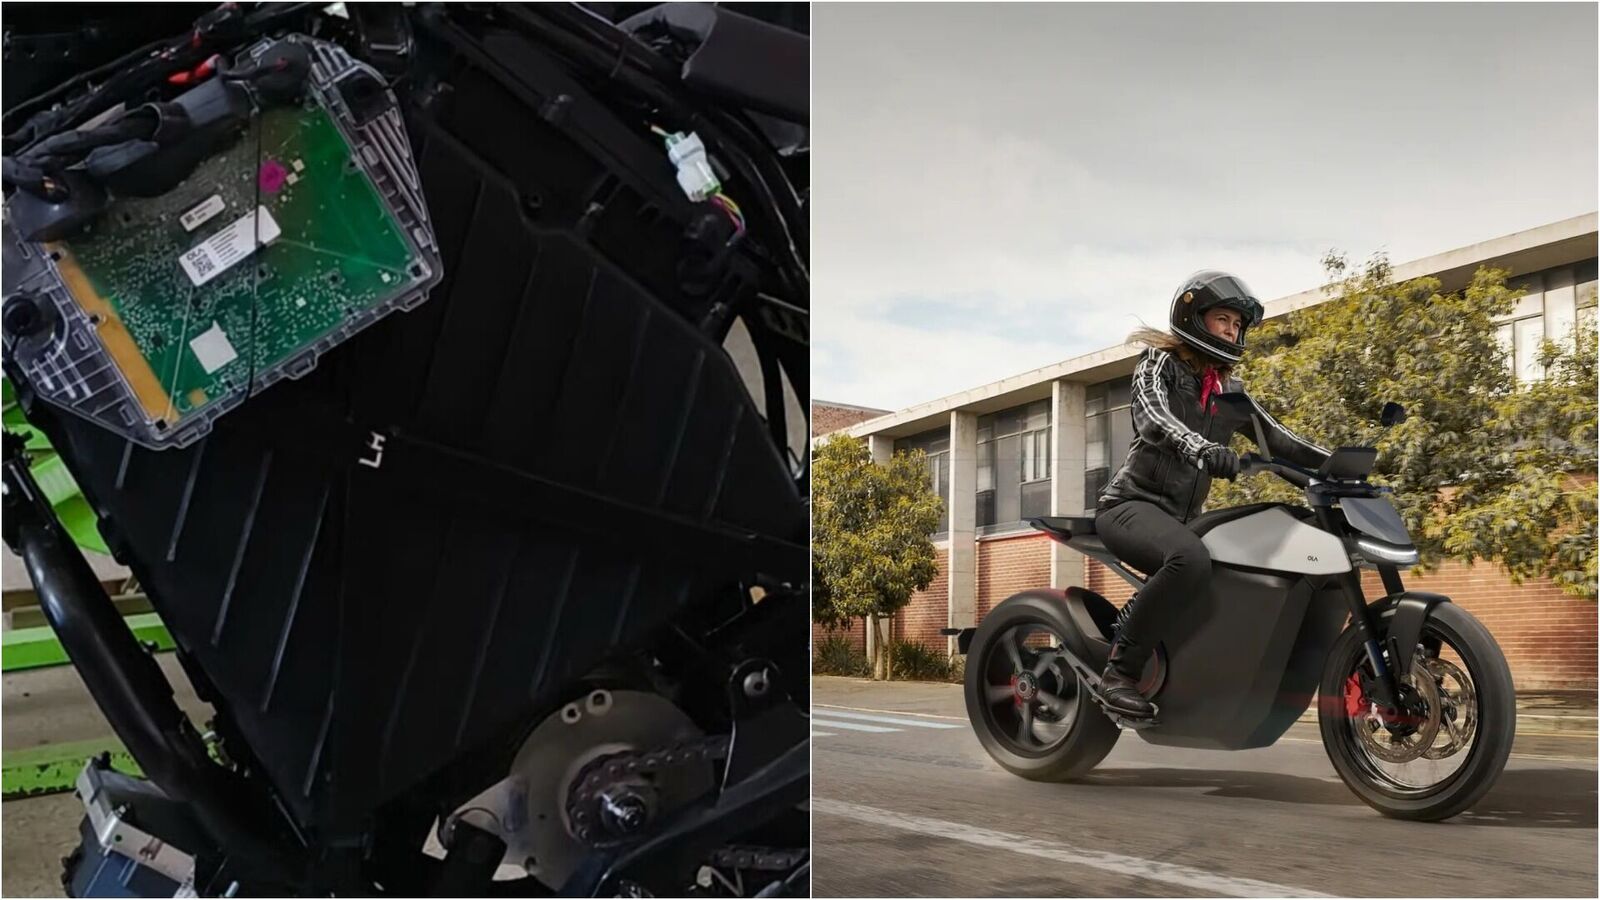 Bhavish Aggarwal drops teaser for new electric motorcycle, shows fixed battery